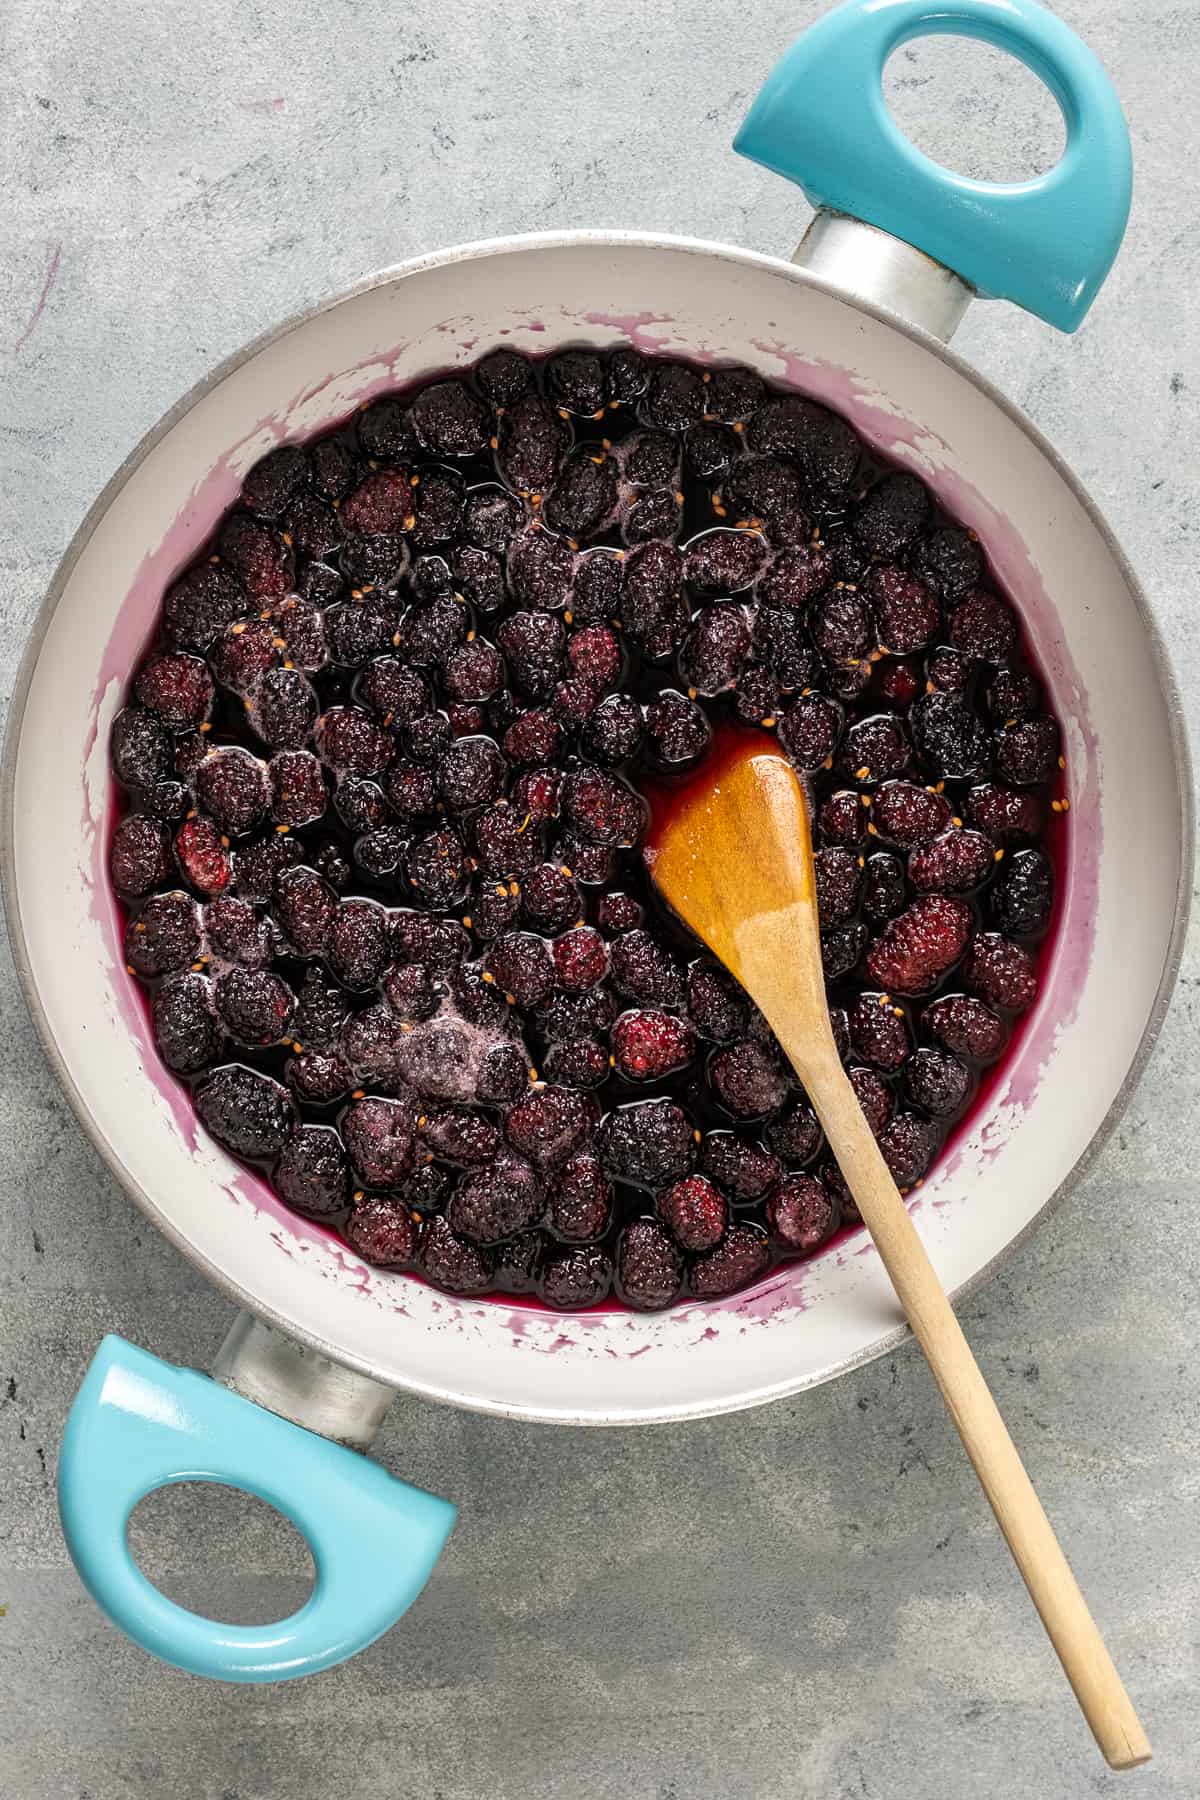 Mulberries cooking in a white pan and a wooden spoon inside it.